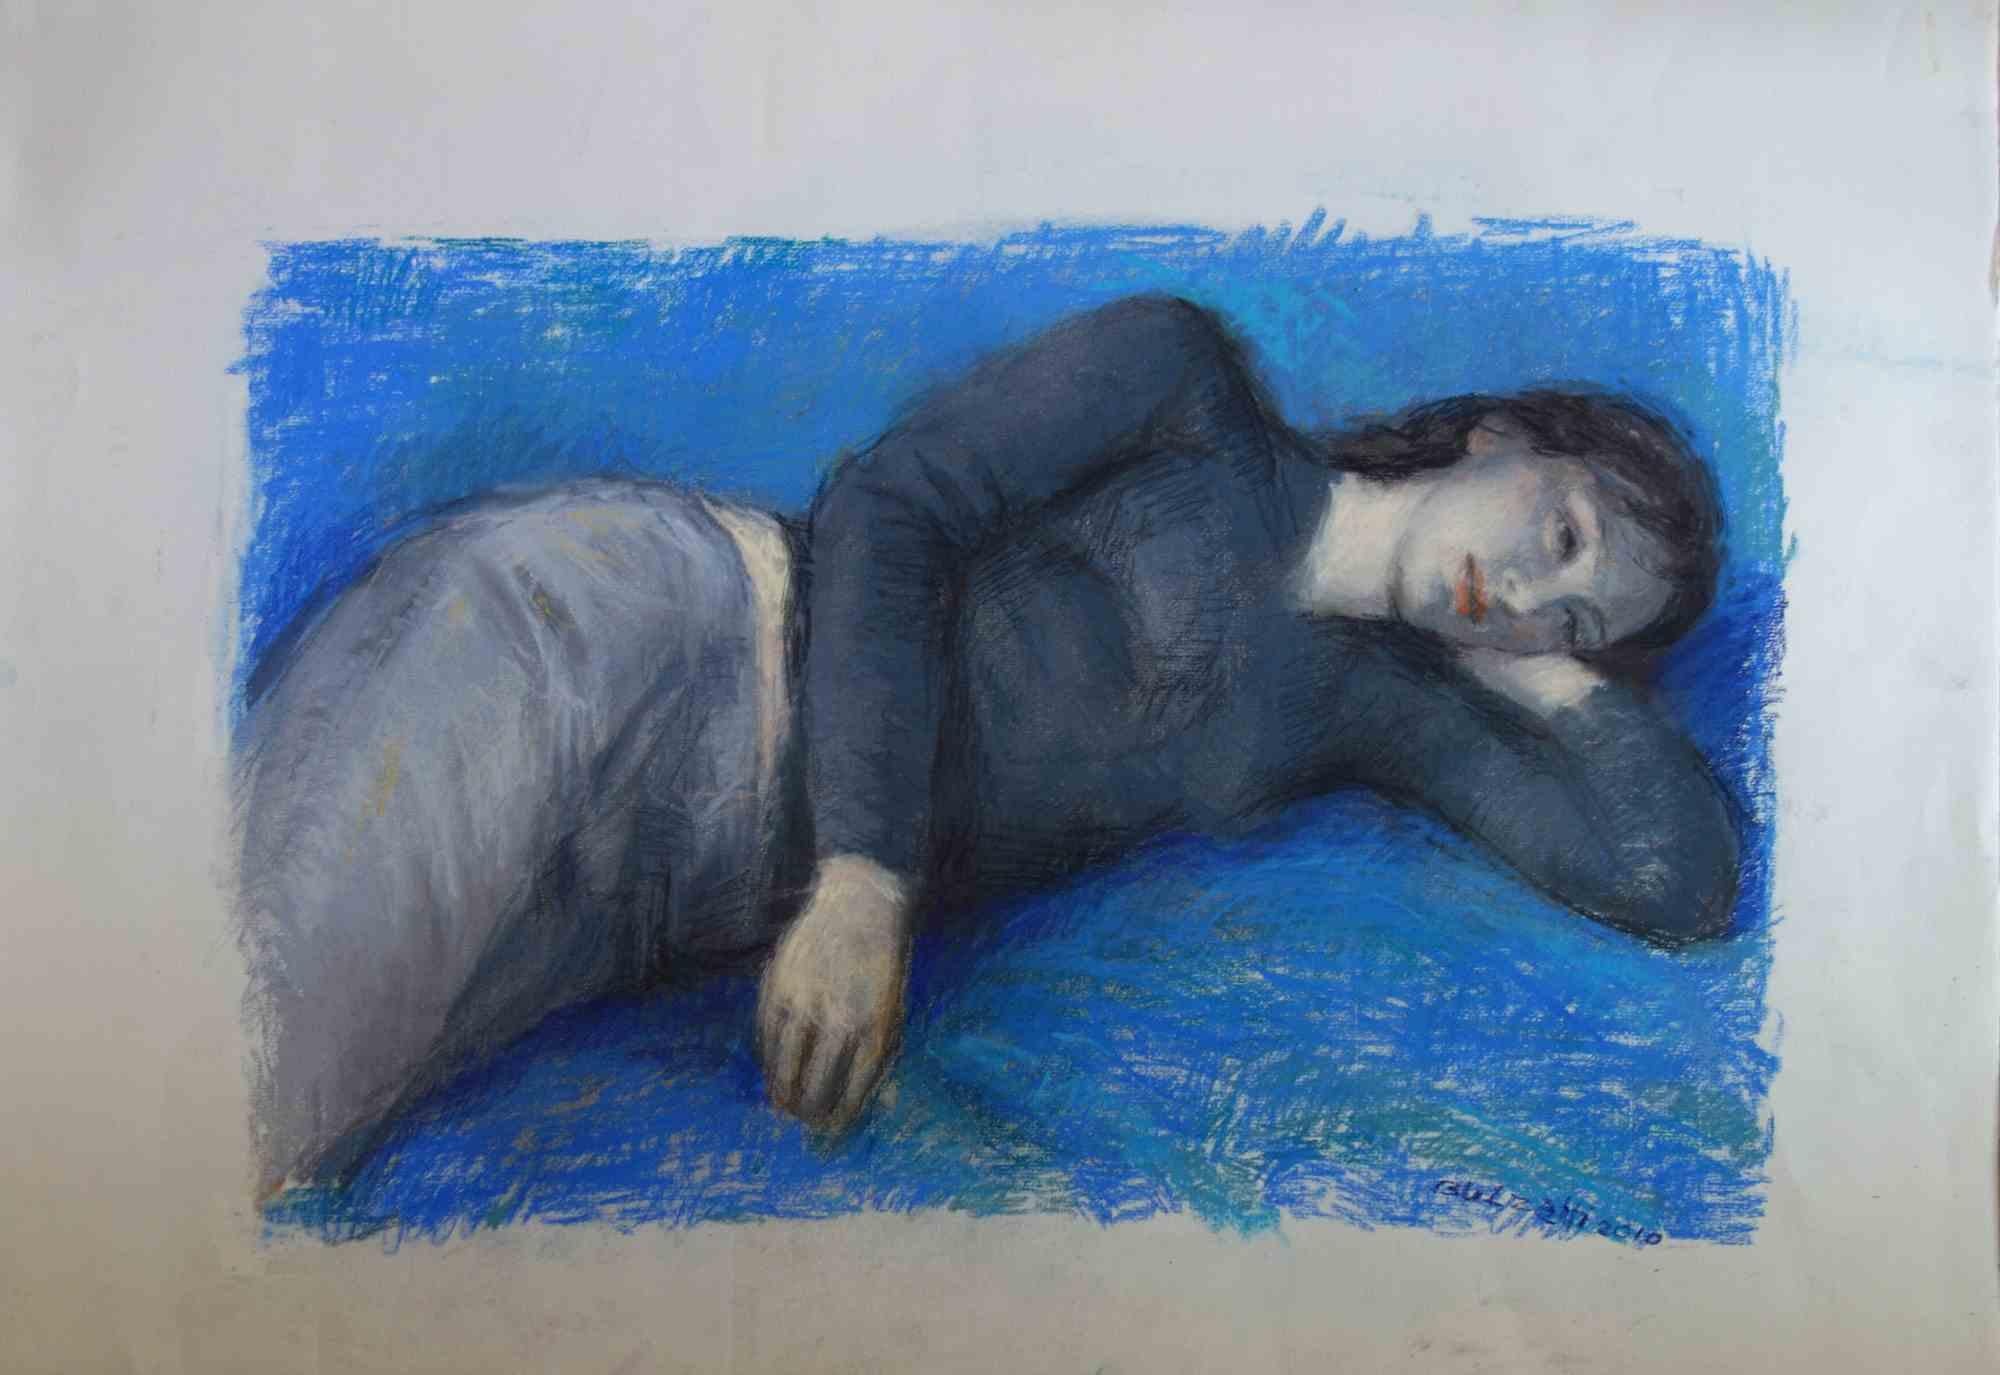 Donna Sdraiata Fondo Blu is an original drawing realized by the Itaian contemporary artist Aurelio Bulzatti in 2010.

The drawing is a unique piece pastel on paper. Hand-signed and dated by the artist.

Excellent conditions.

Donna Sdraiata Fondo